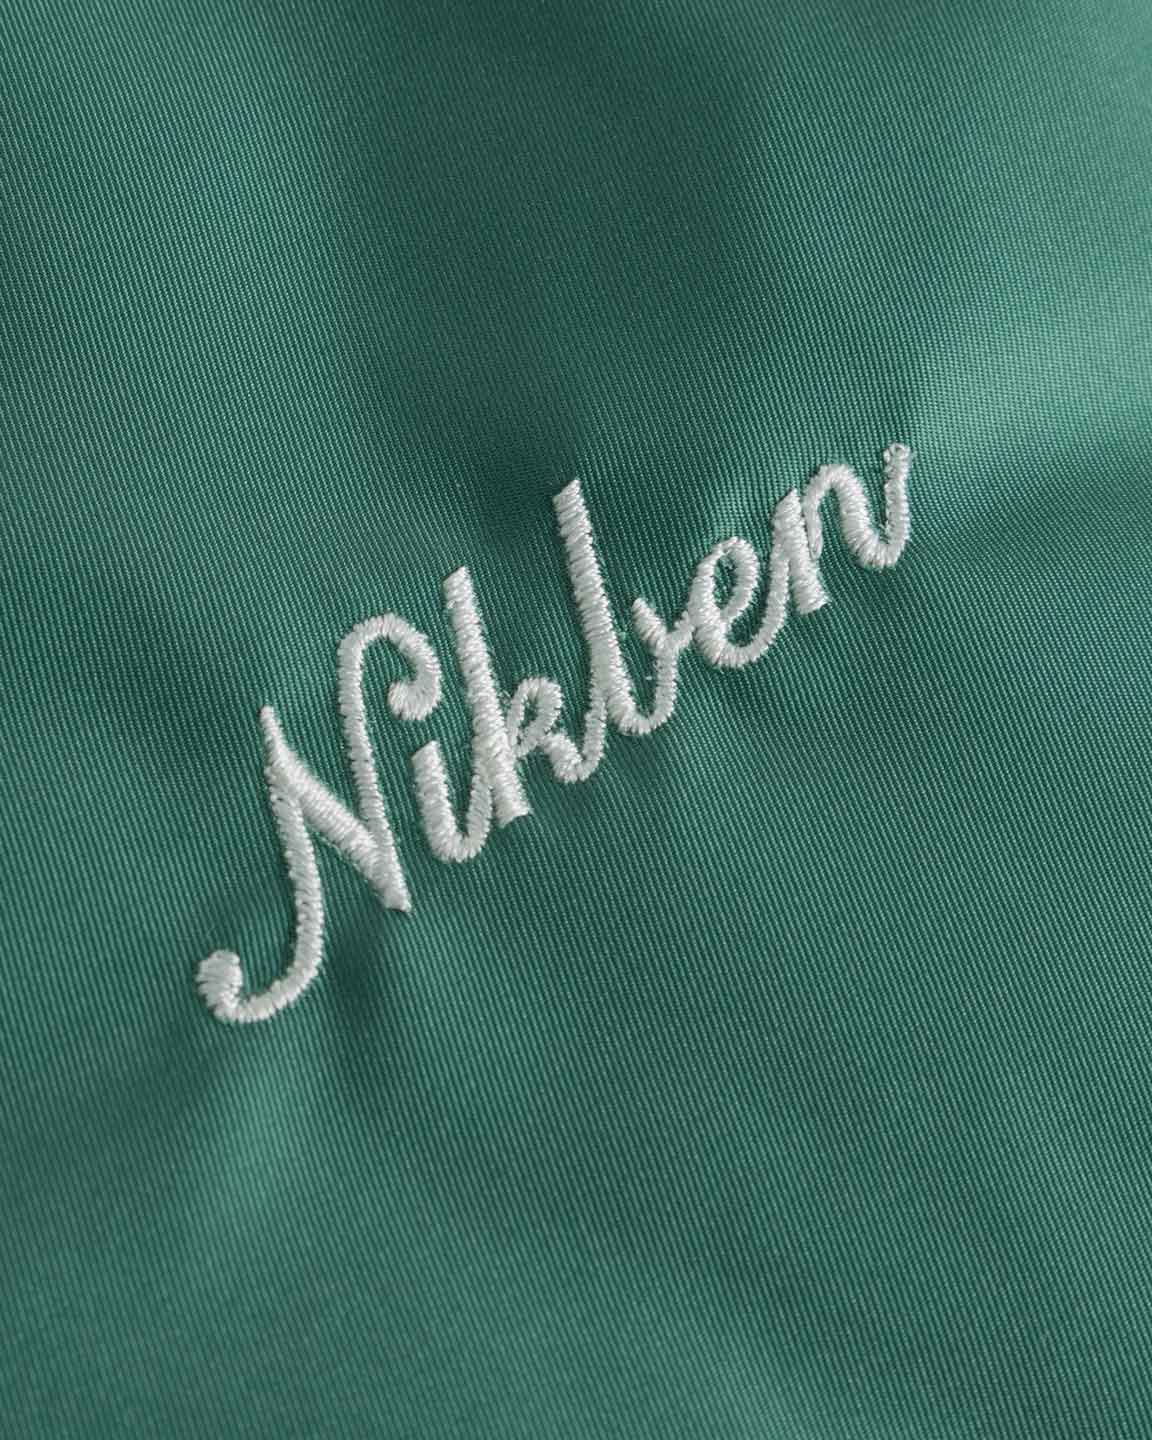 Close up of embroidered script logo on a green 80s style baseball jacket